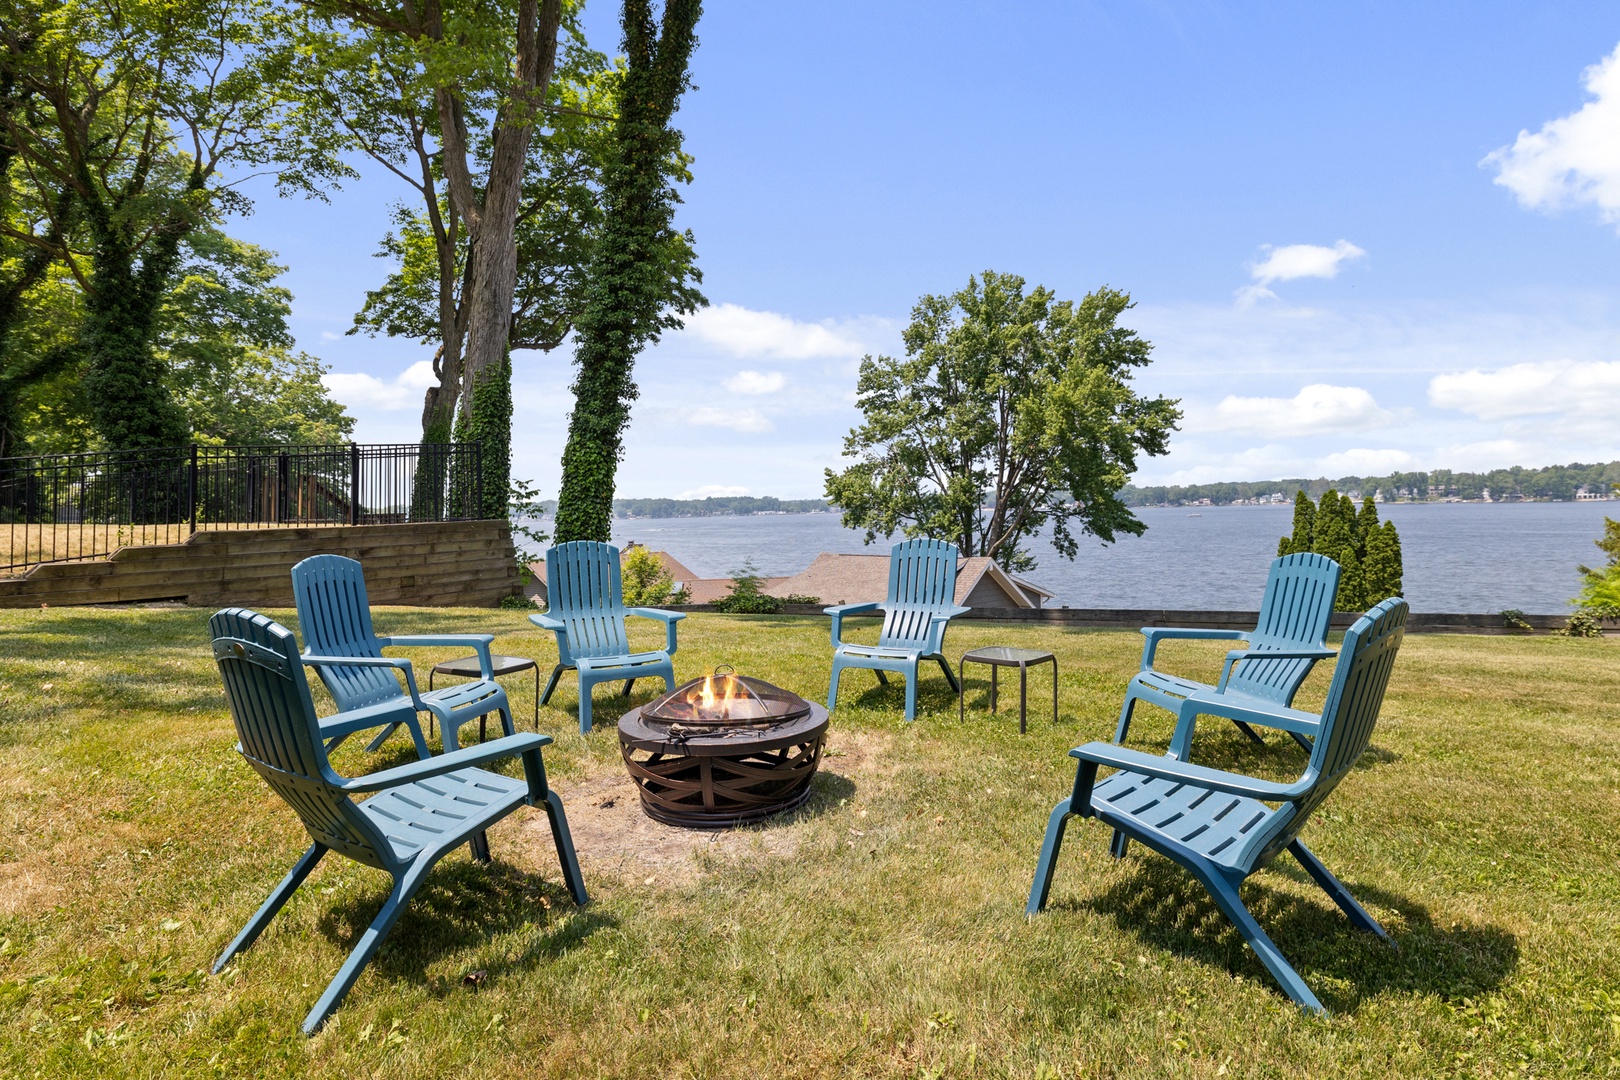 Fireside moments with views of Paw Paw lake? Now that's a vacation!